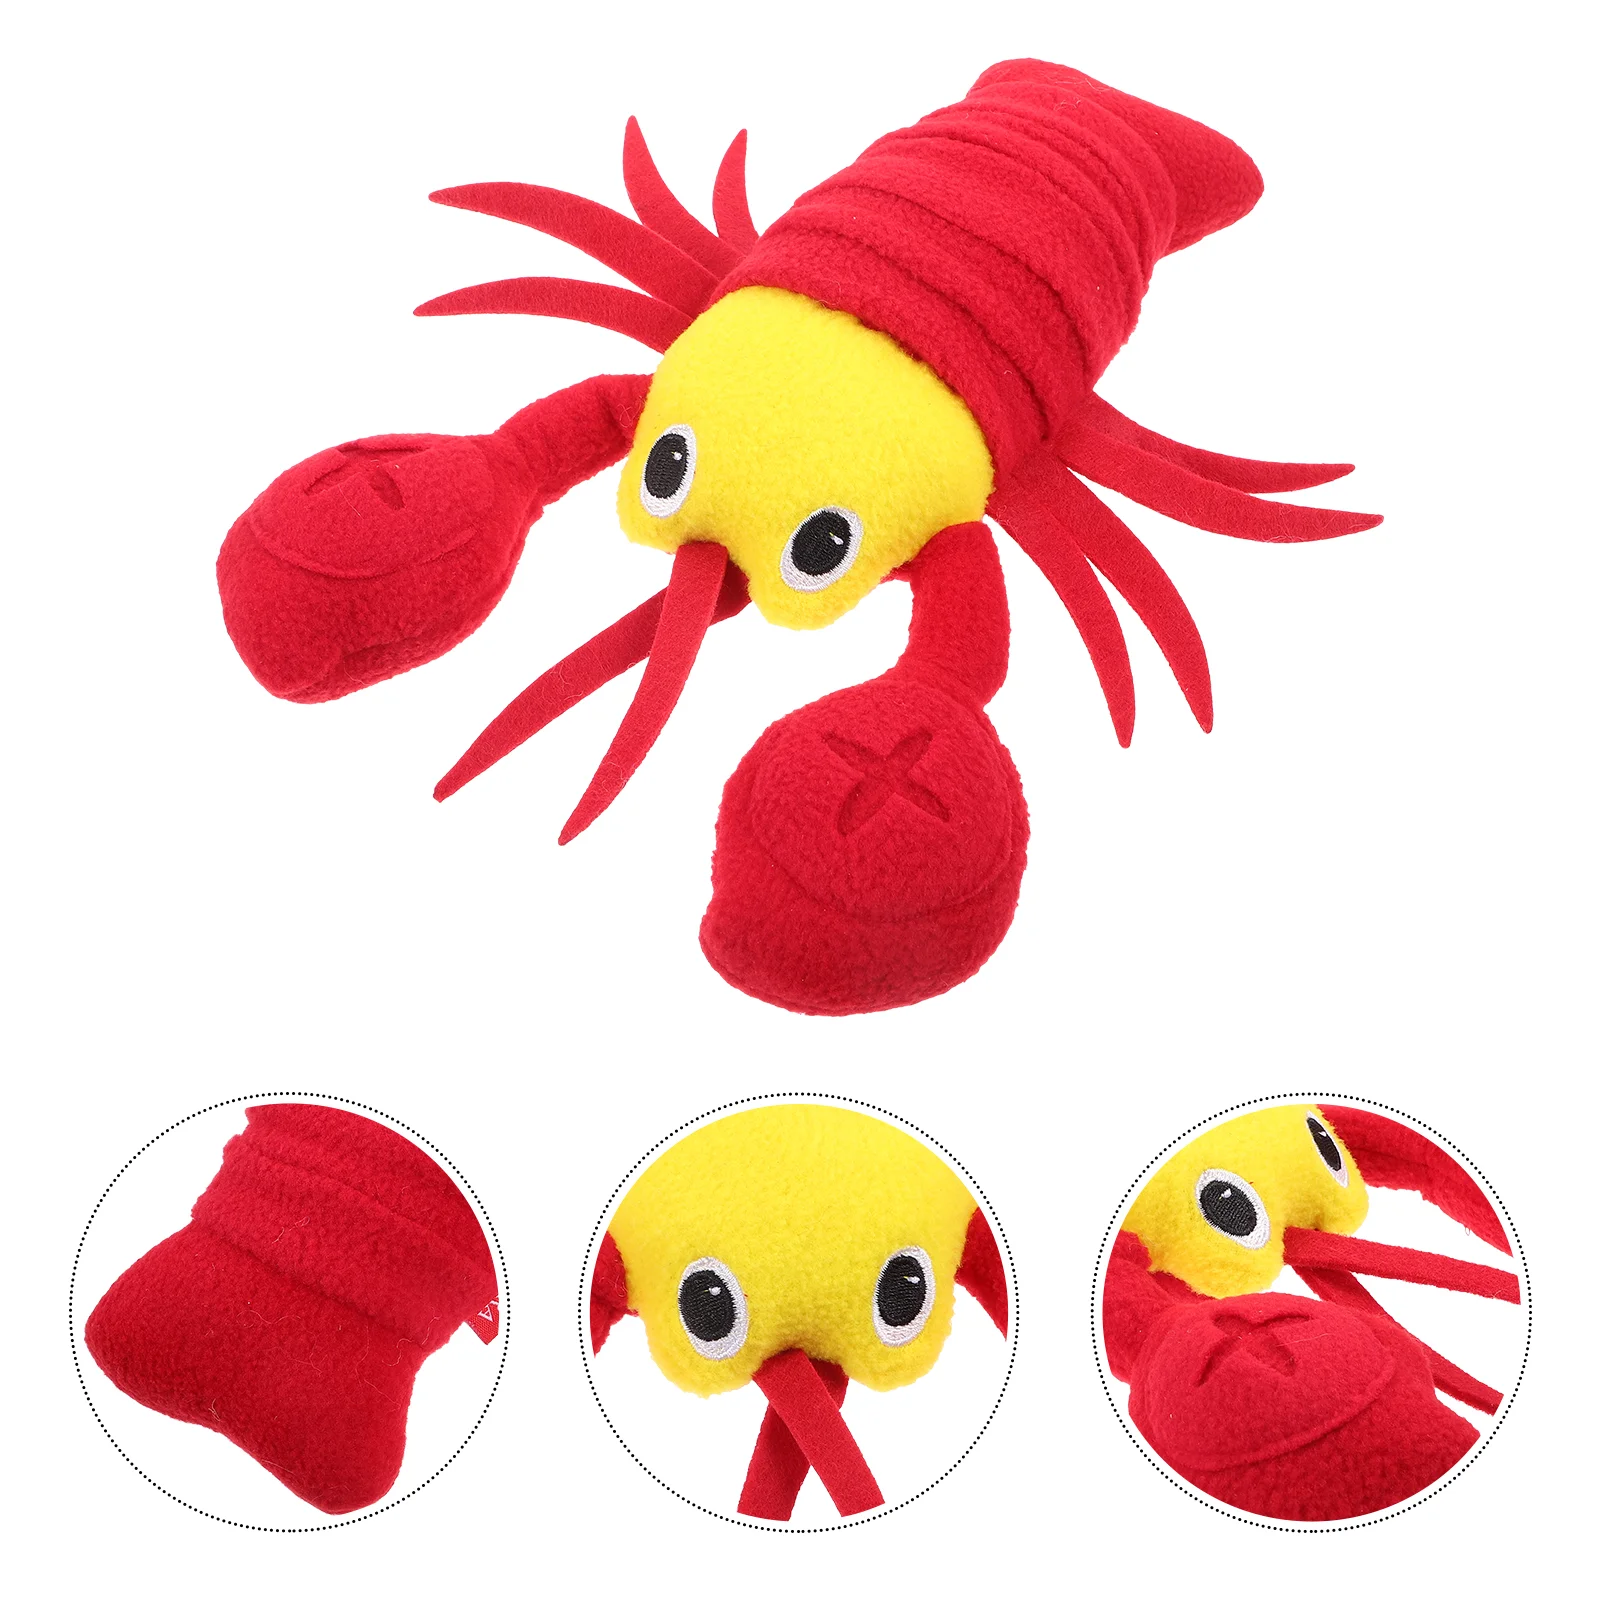 

Pet Plush Toys Dog Stuffed Animals Cartoon Shrimp Shaped Pets Chewing Interactive Squeaky Dogs Teething Biting Bundle Lovely